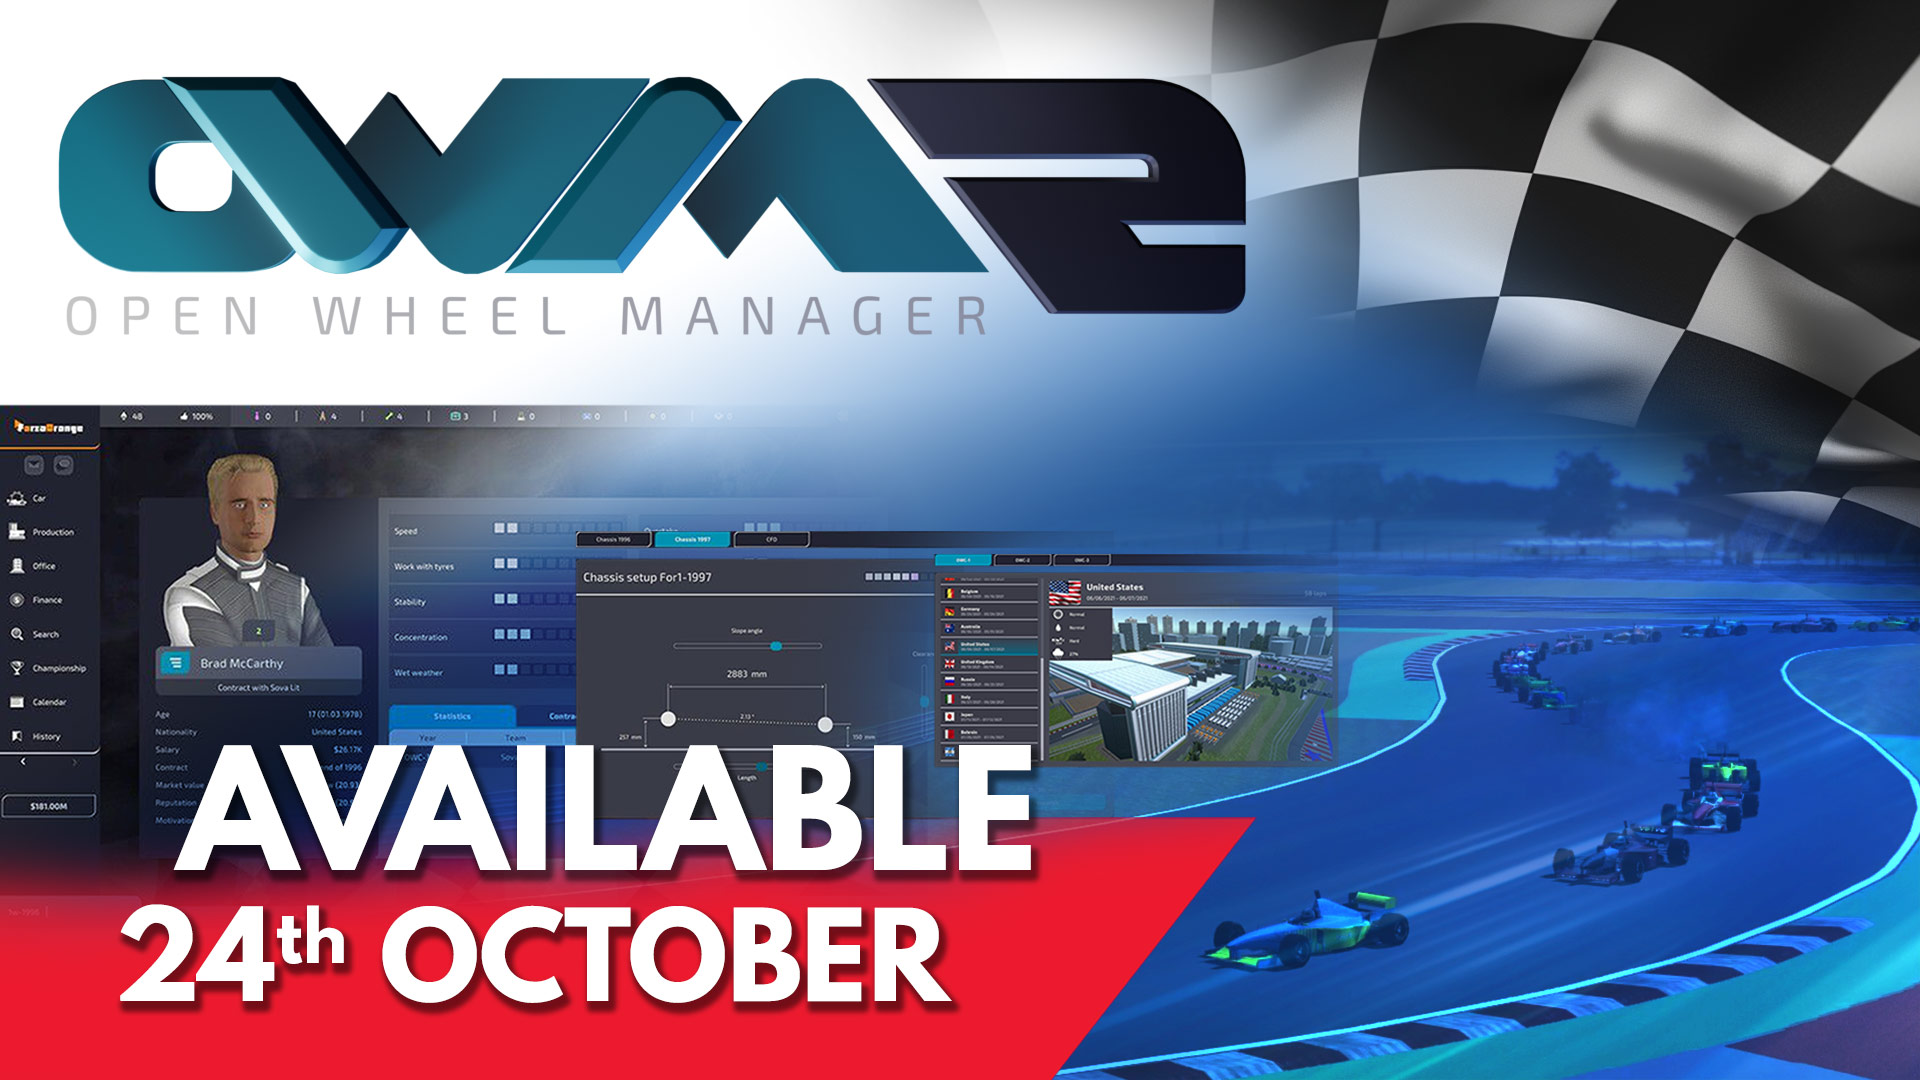 Open Wheel Manager 2: Available 24th of October